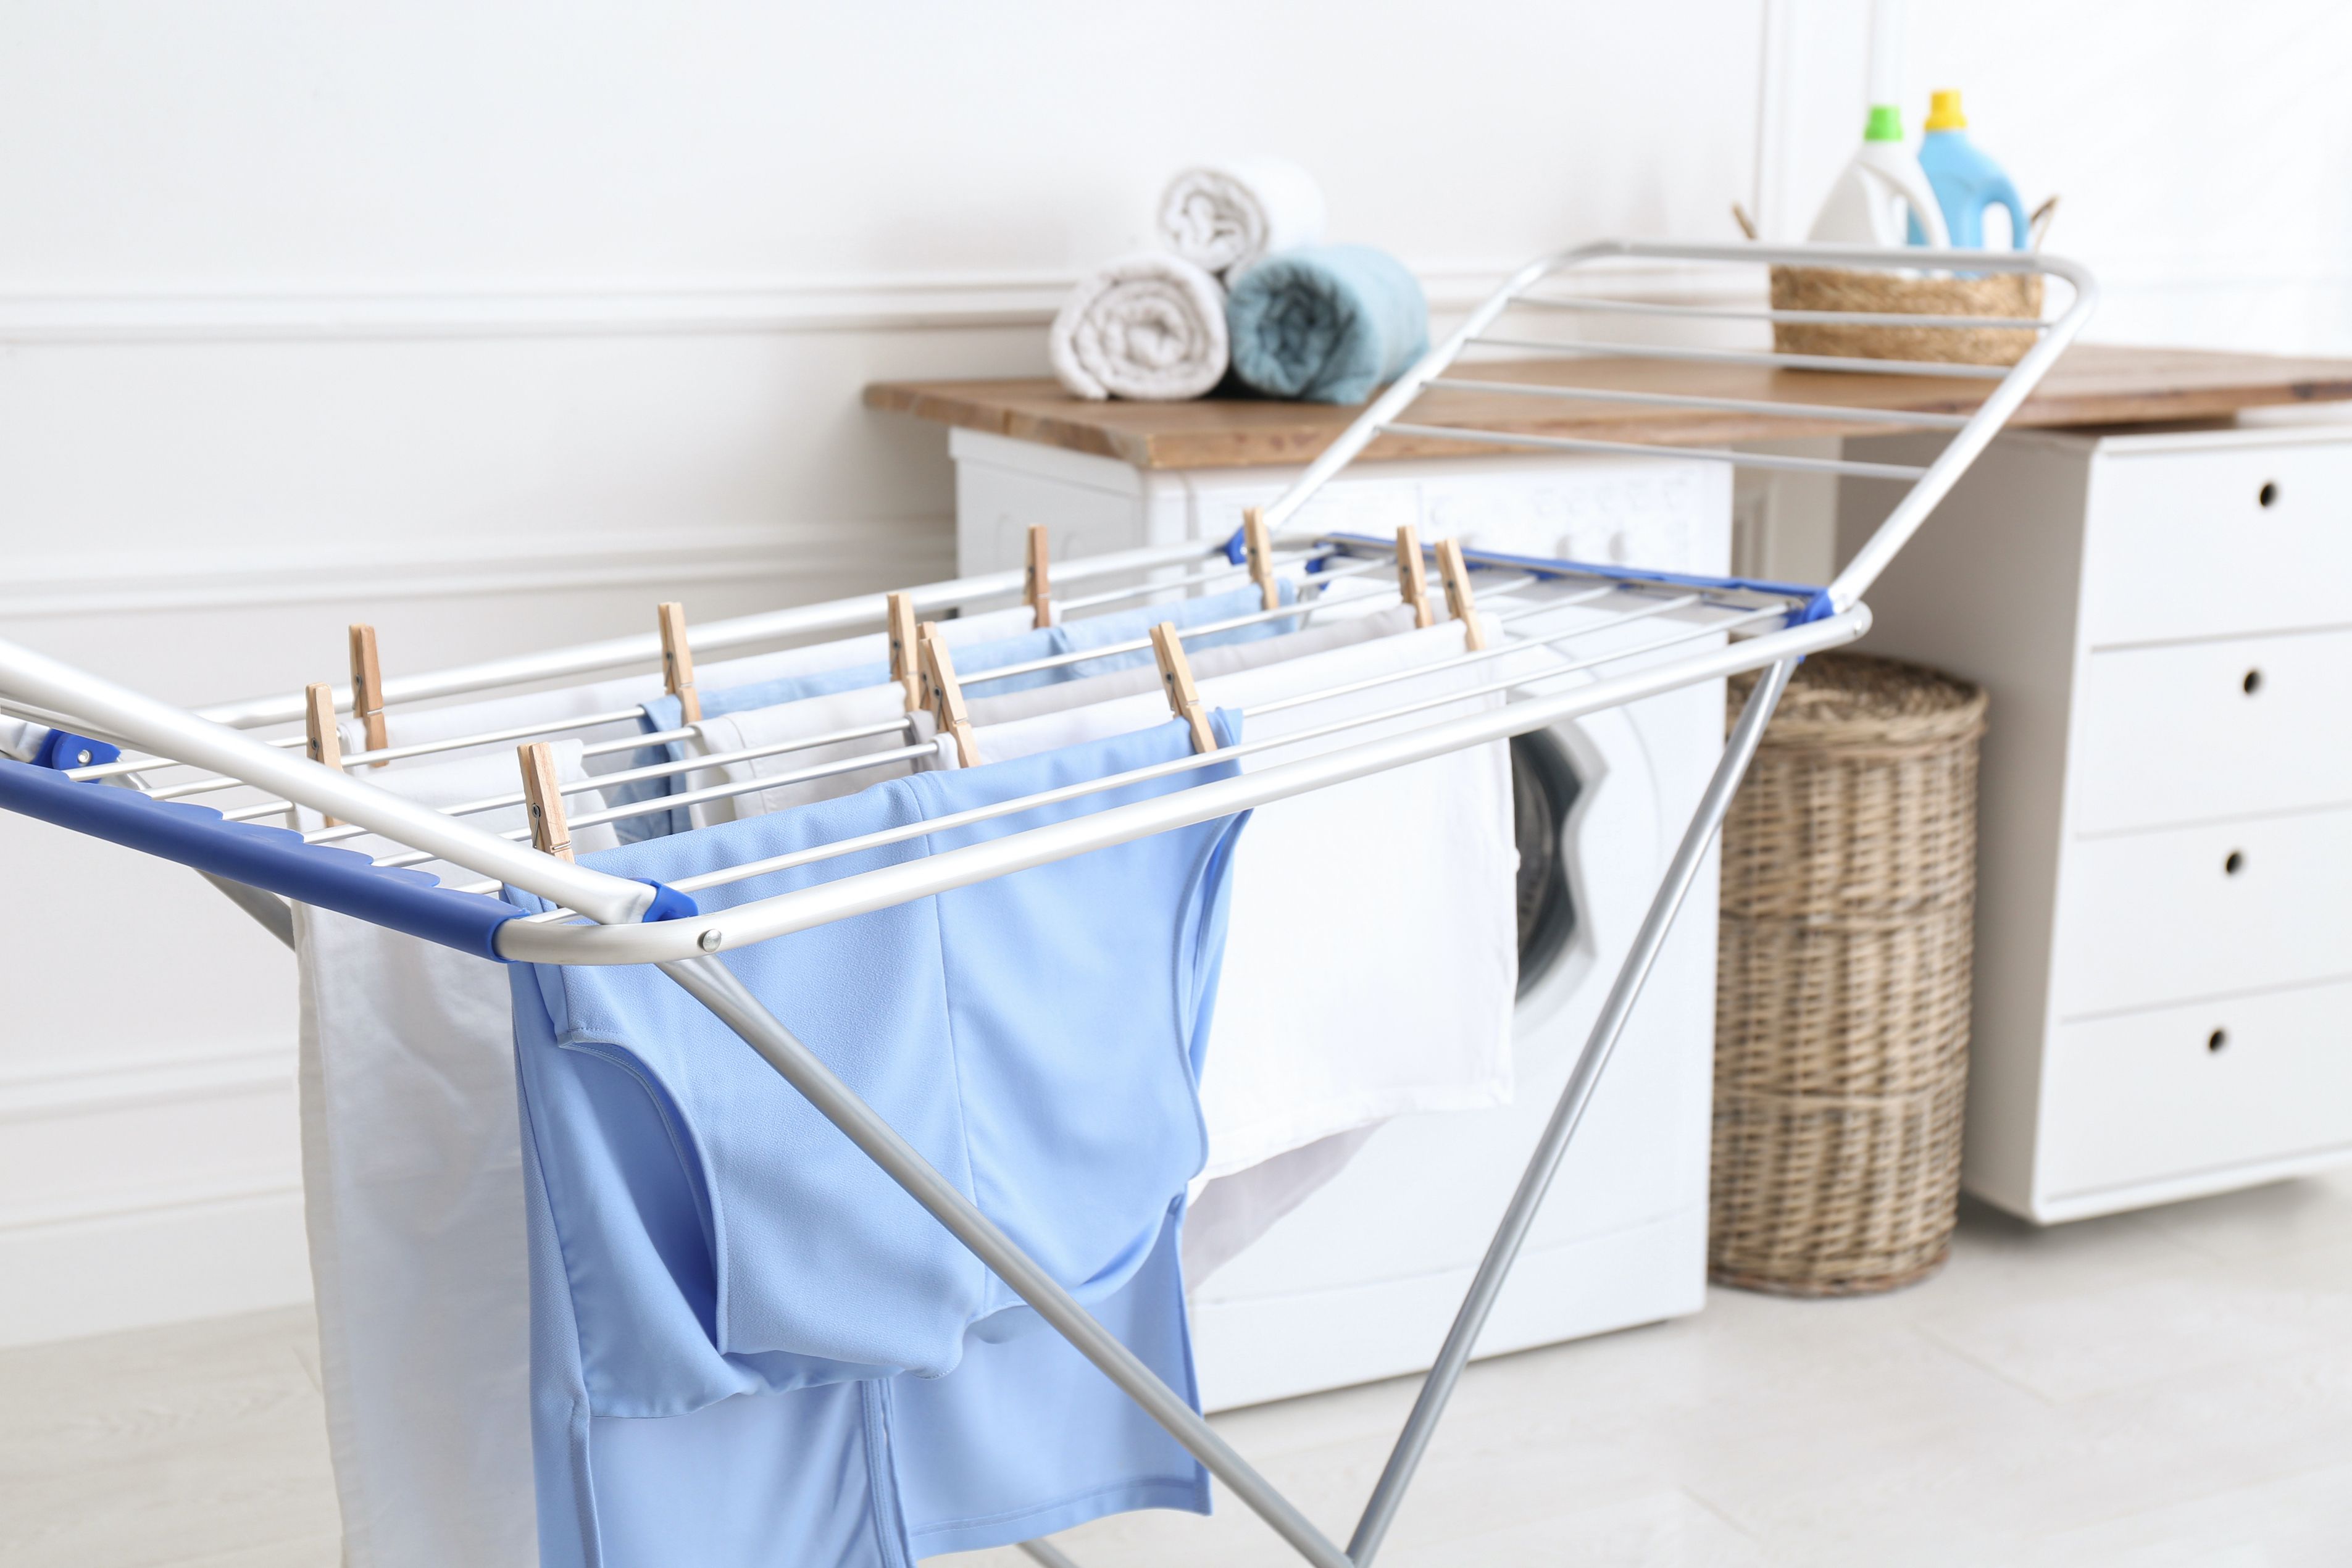 The Top 5 Benefits of Drying Clothes in the Sun